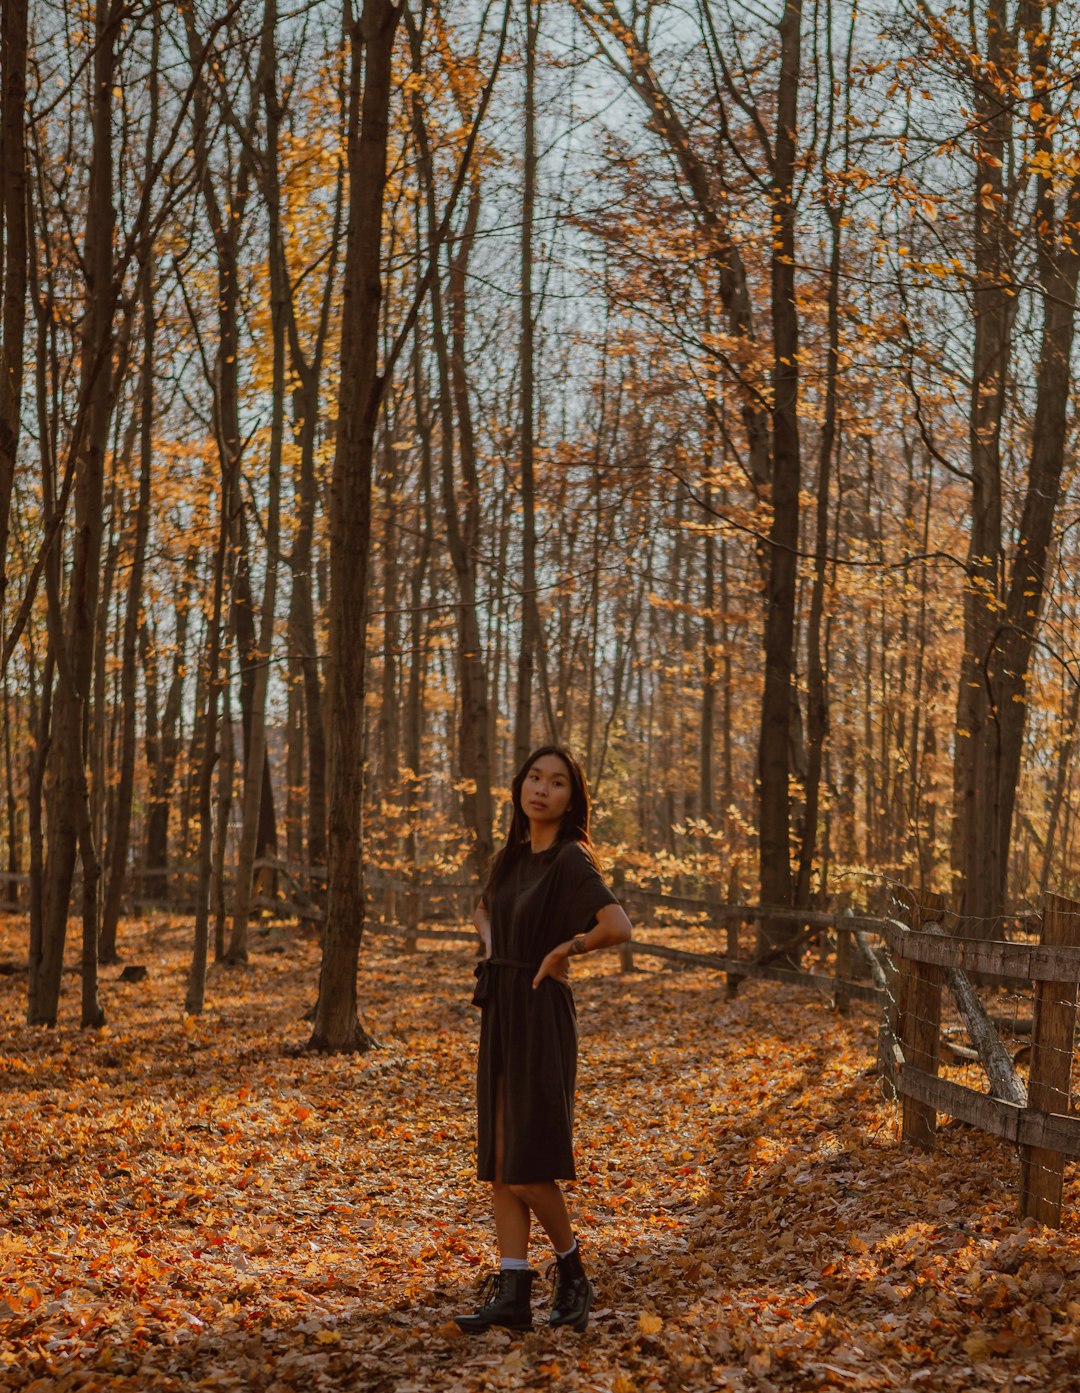 woman in black coat standing on brown dried leaves on ground surrounded by trees during daytime